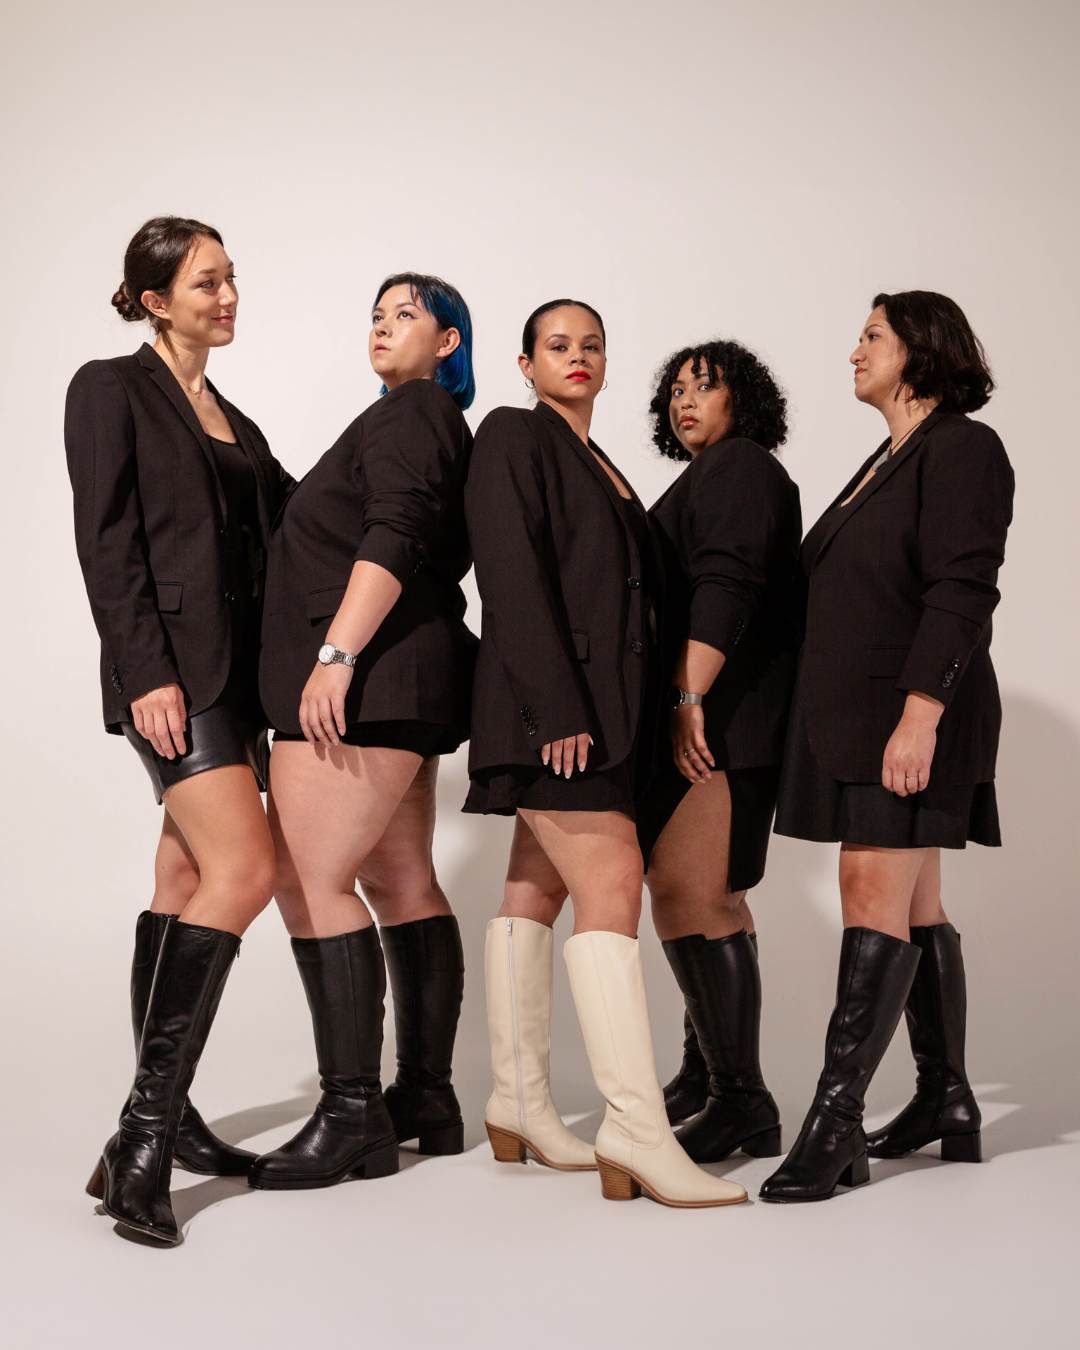 A group of women wearing black knee high boots. The woman in the middle is wearing white knee high boots. Luxury Brand Expands Size Range